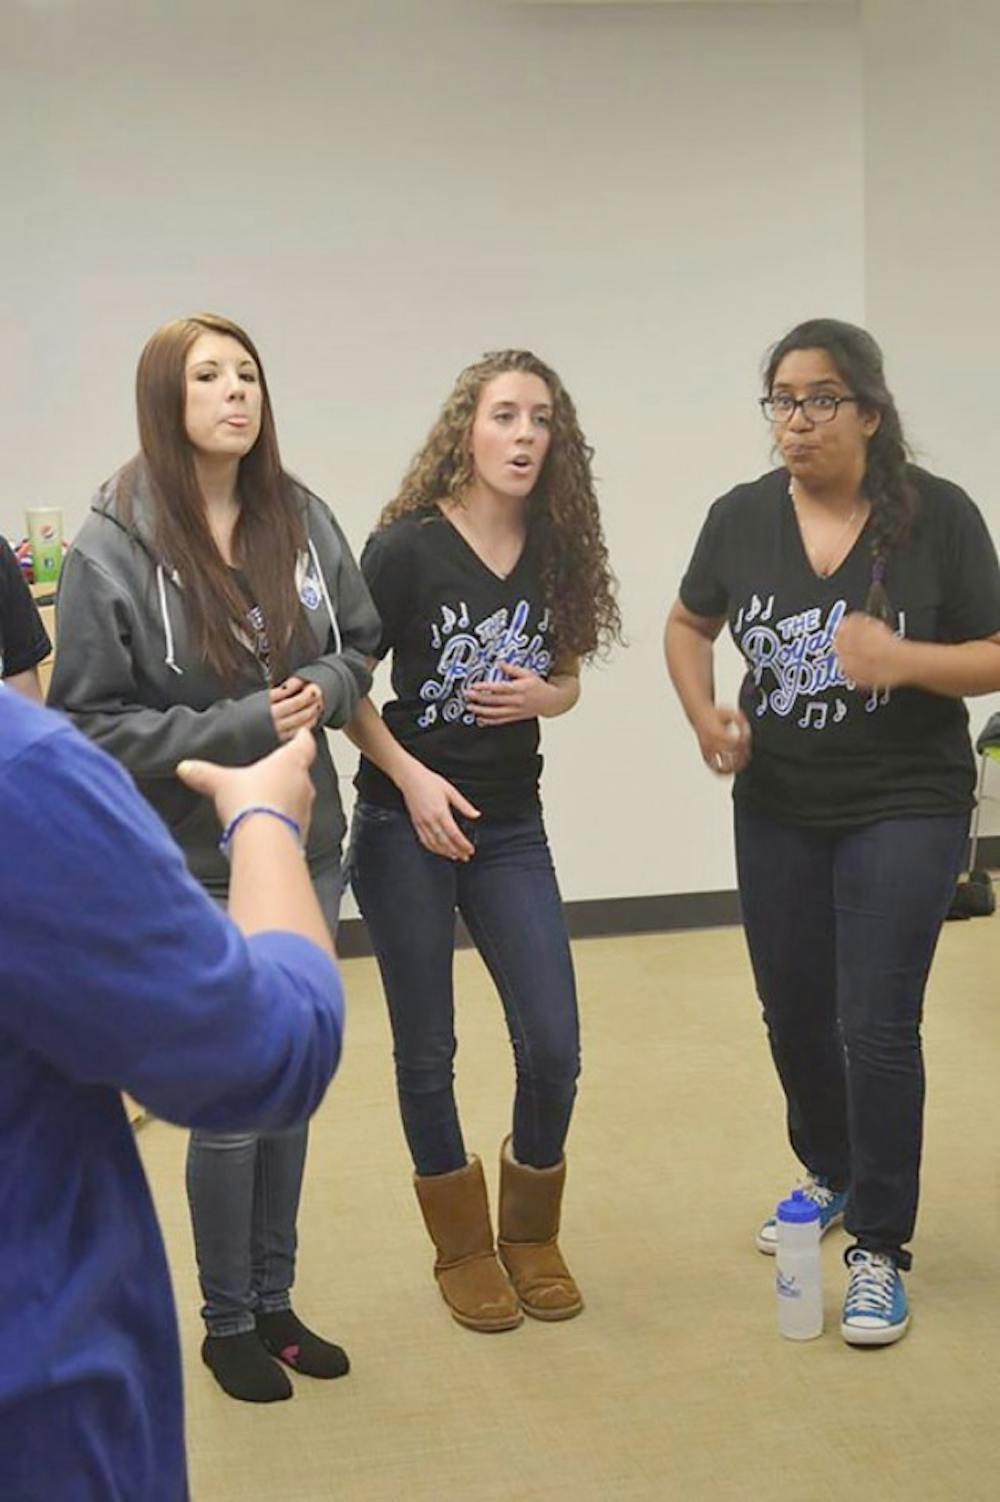 Raquel Sosnovich, center, enjoys singing with the friends she made after joining The Royal Pitches. The Royal Pitches, an on-campus all-girls a capella group, provides Sosnovich, as well as many other girls, an opportunity to pursue their passion for singing. Courtesy of Lily Weisberg
&nbsp;